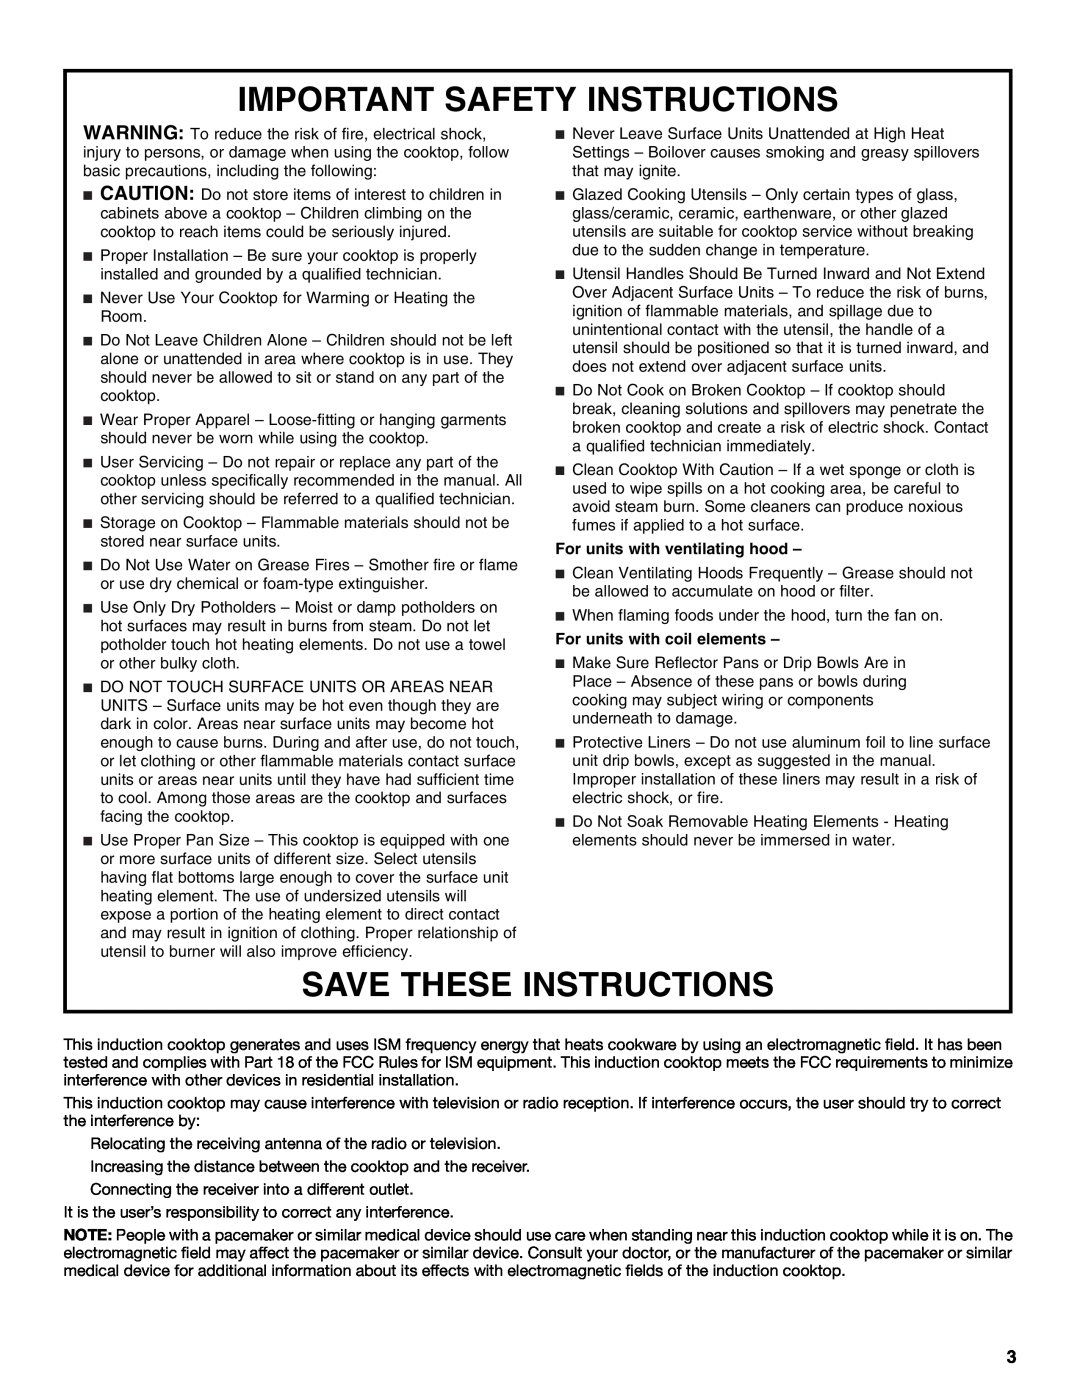 Jenn-Air JIC4430X manual Important Safety Instructions, Save These Instructions, For units with ventilating hood 